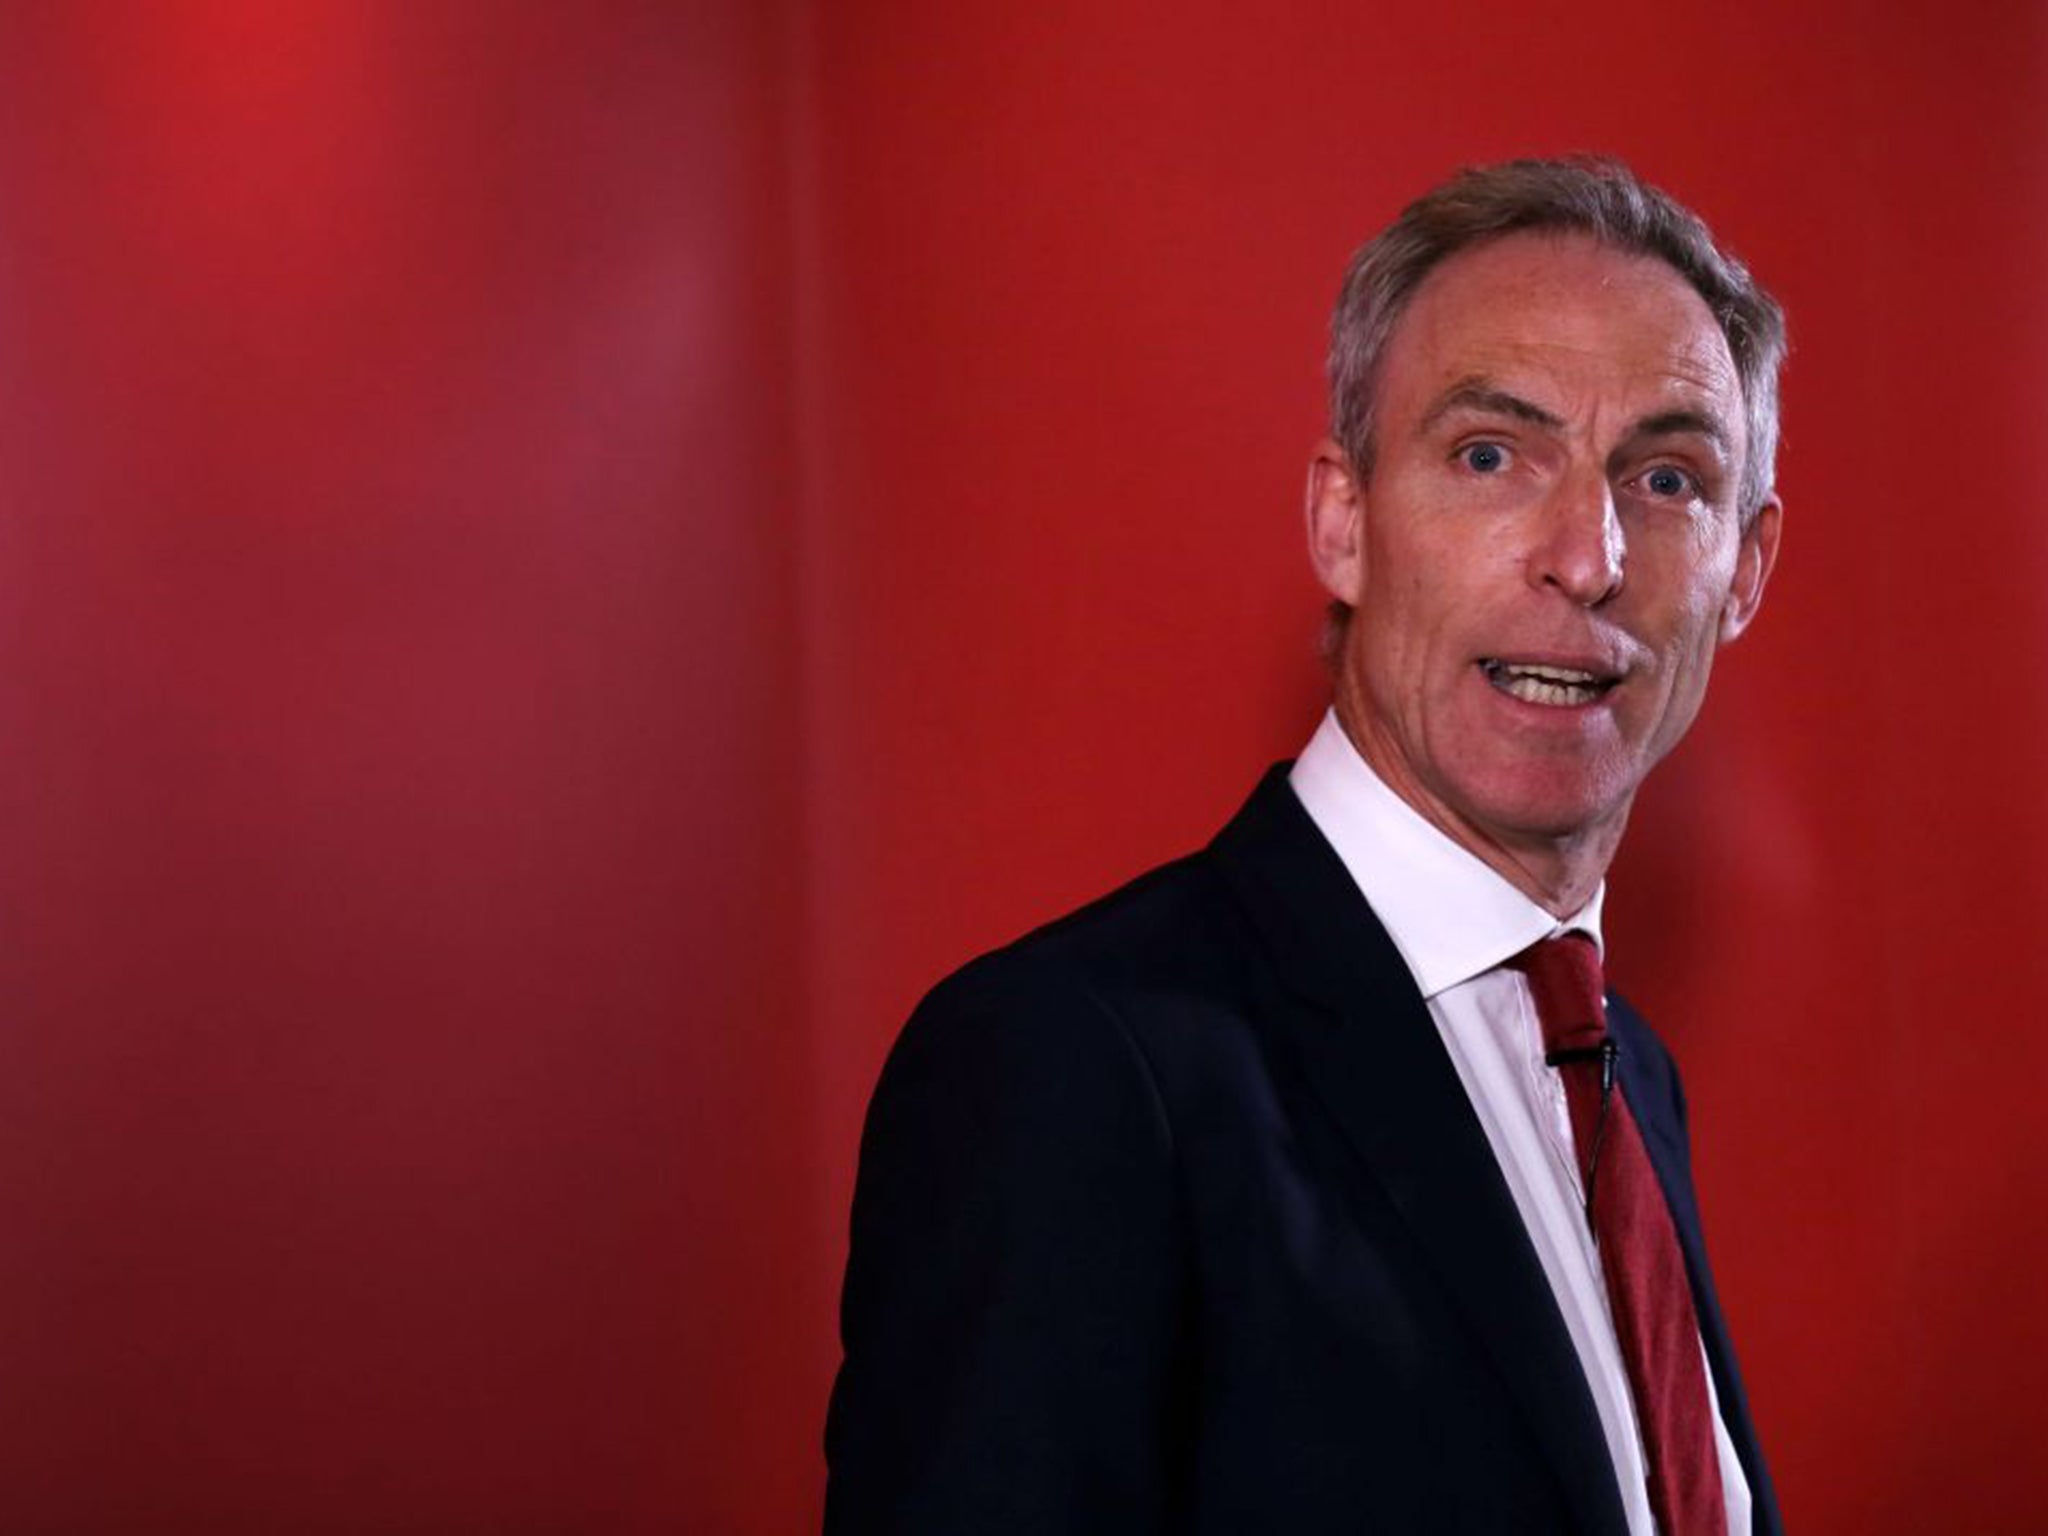 Despite winning a confidence ballot by 17 votes to 14, Jim Murphy has announced he will resign next month